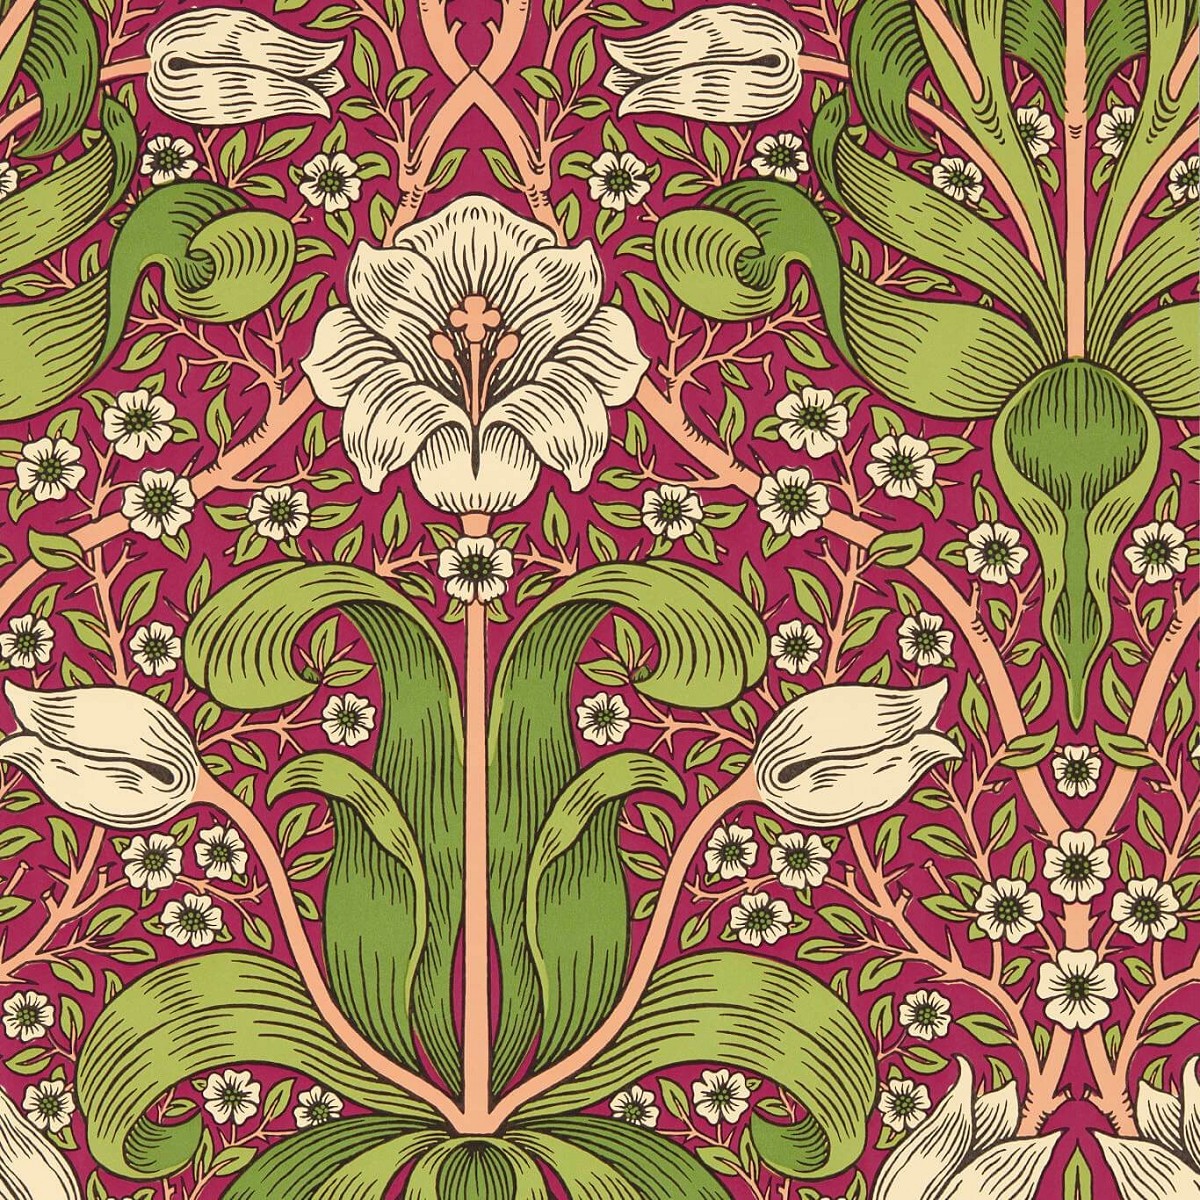 Spring Thicket Maraschino Cherry Fabric by William Morris & Co.